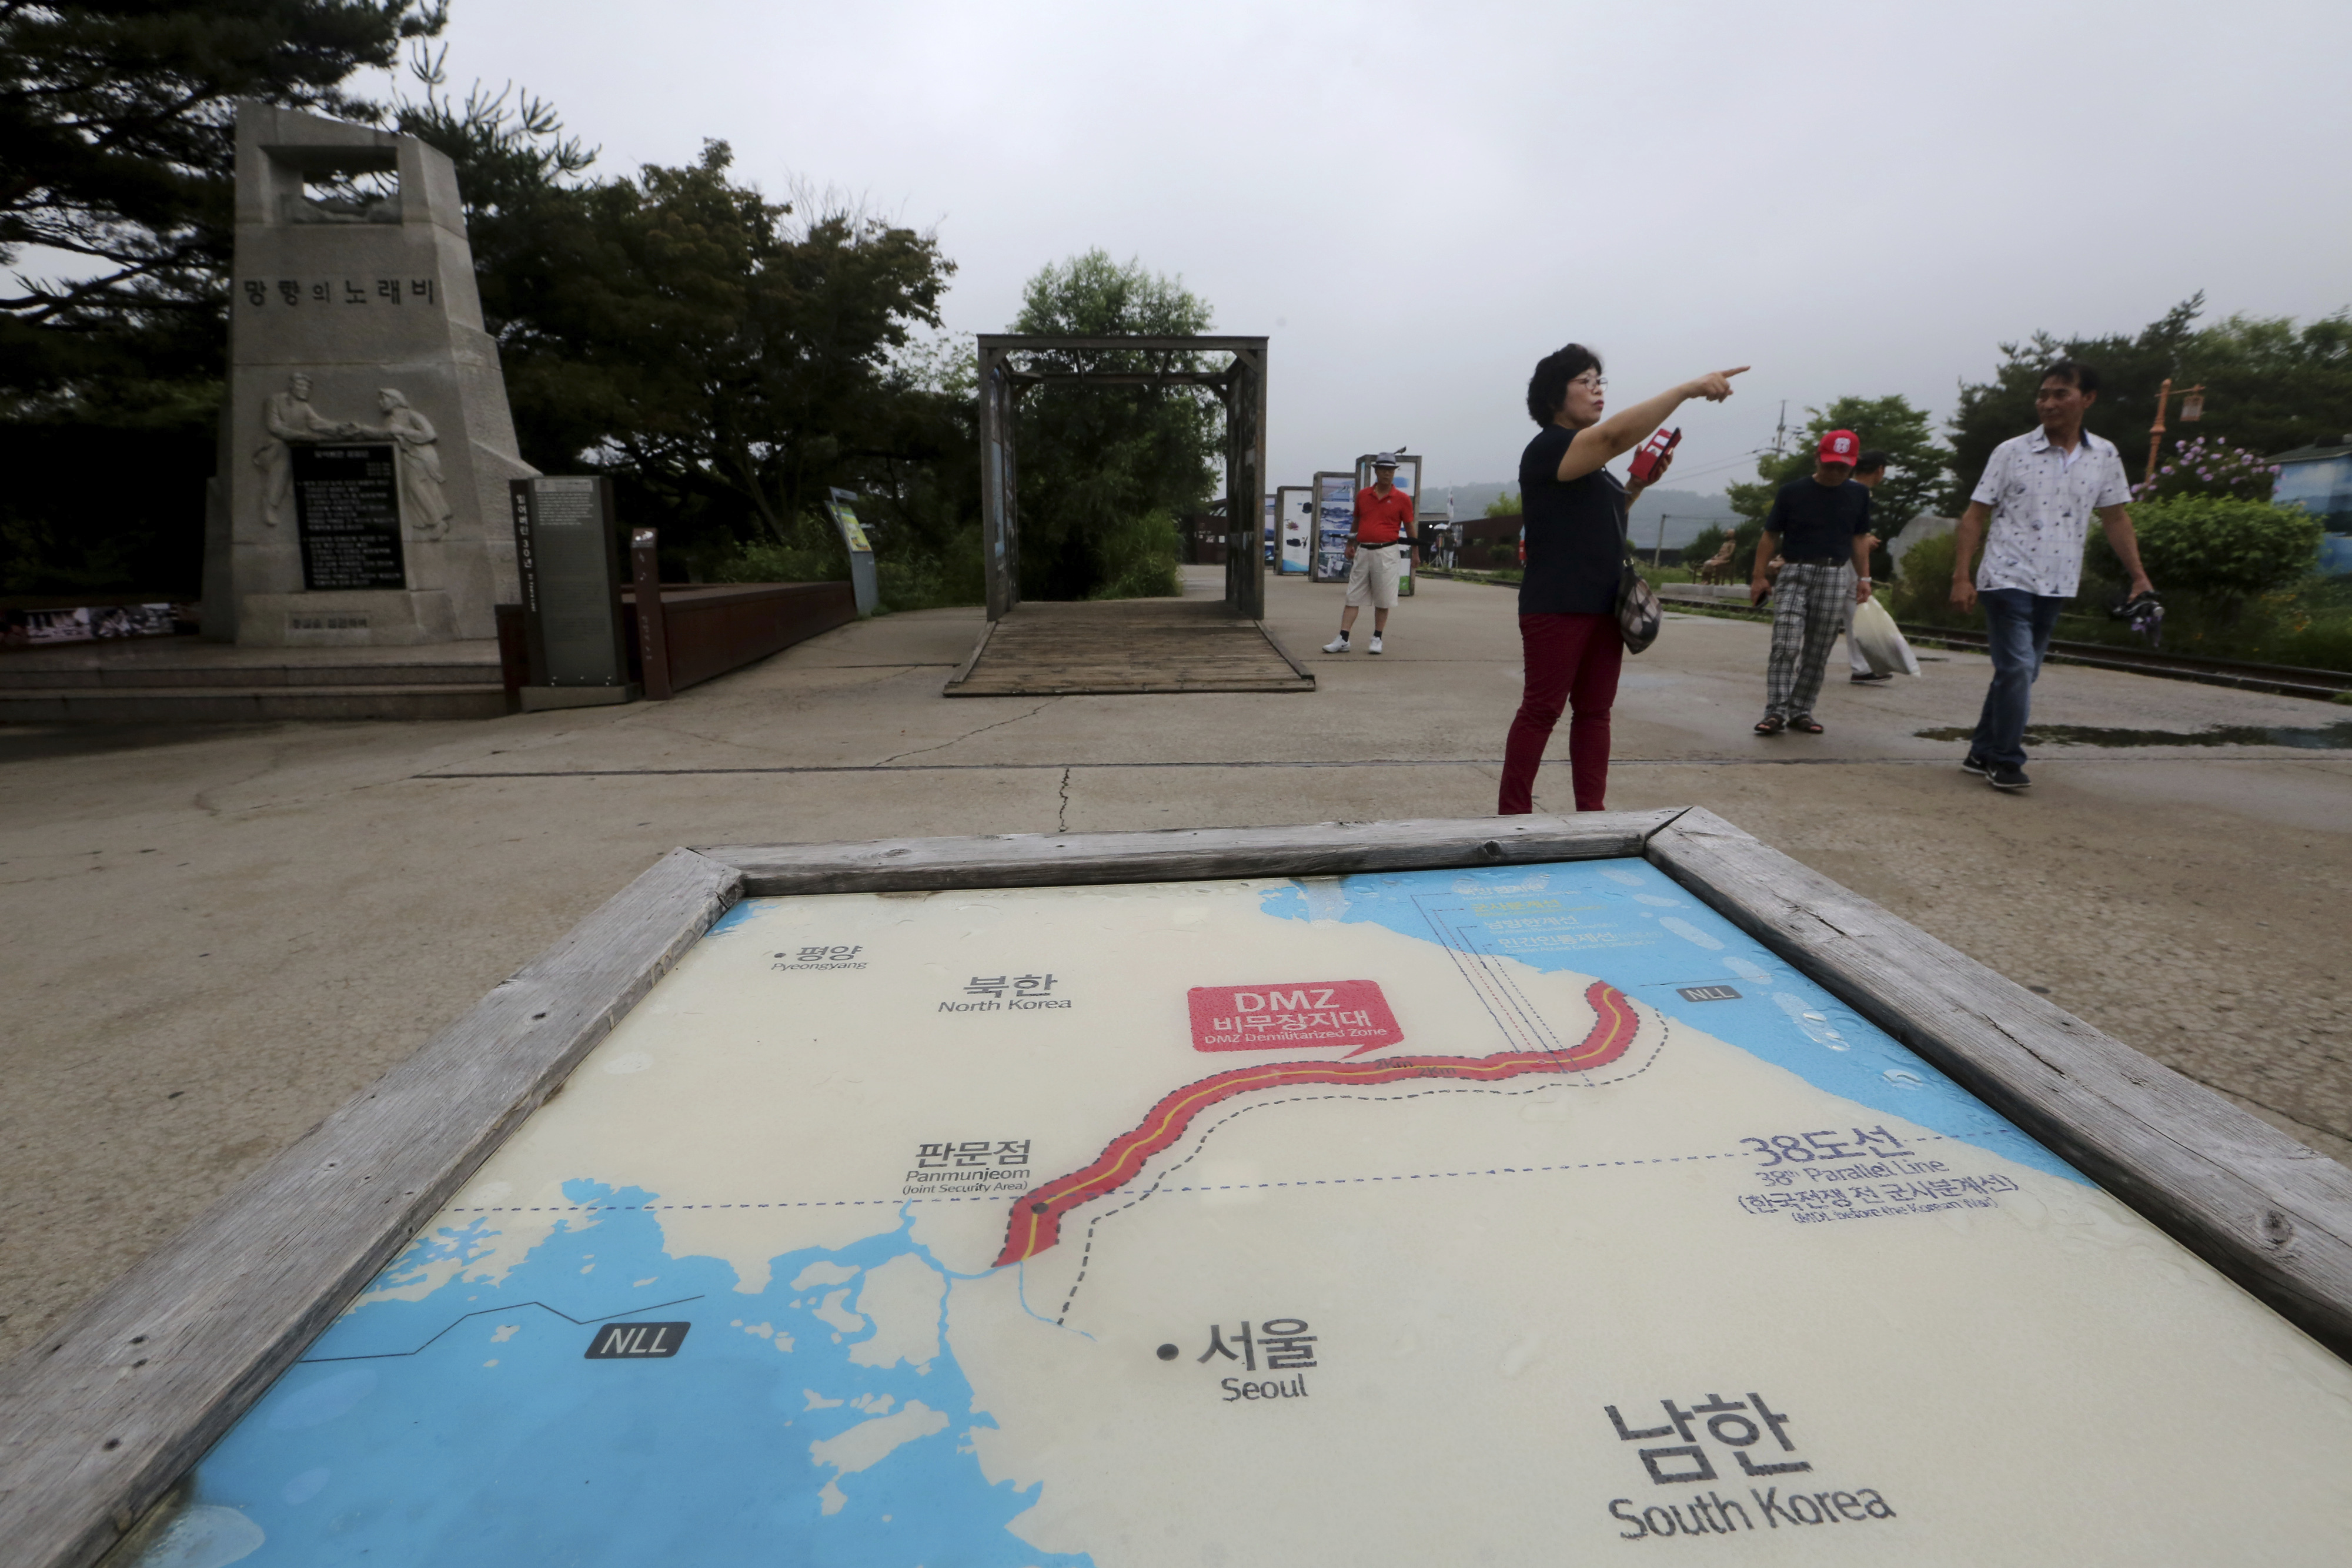 Visitors pass by a map of two Koreas showing North Korea's capital Pyongyang and South Korea's capital Seoul at the Imjingak Pavilion in Paju, South Korea, near the border with North Korea, Thursday, July 25, 2019. North Korea fired two short-range missiles into the sea Thursday, South Korea's military said, the first weapons launches in more than two months and an apparent pressuring tactic aimed at Washington as North Korean and U.S. officials struggle to restart nuclear negotiations. (AP Photo/Ahn Young-joon)